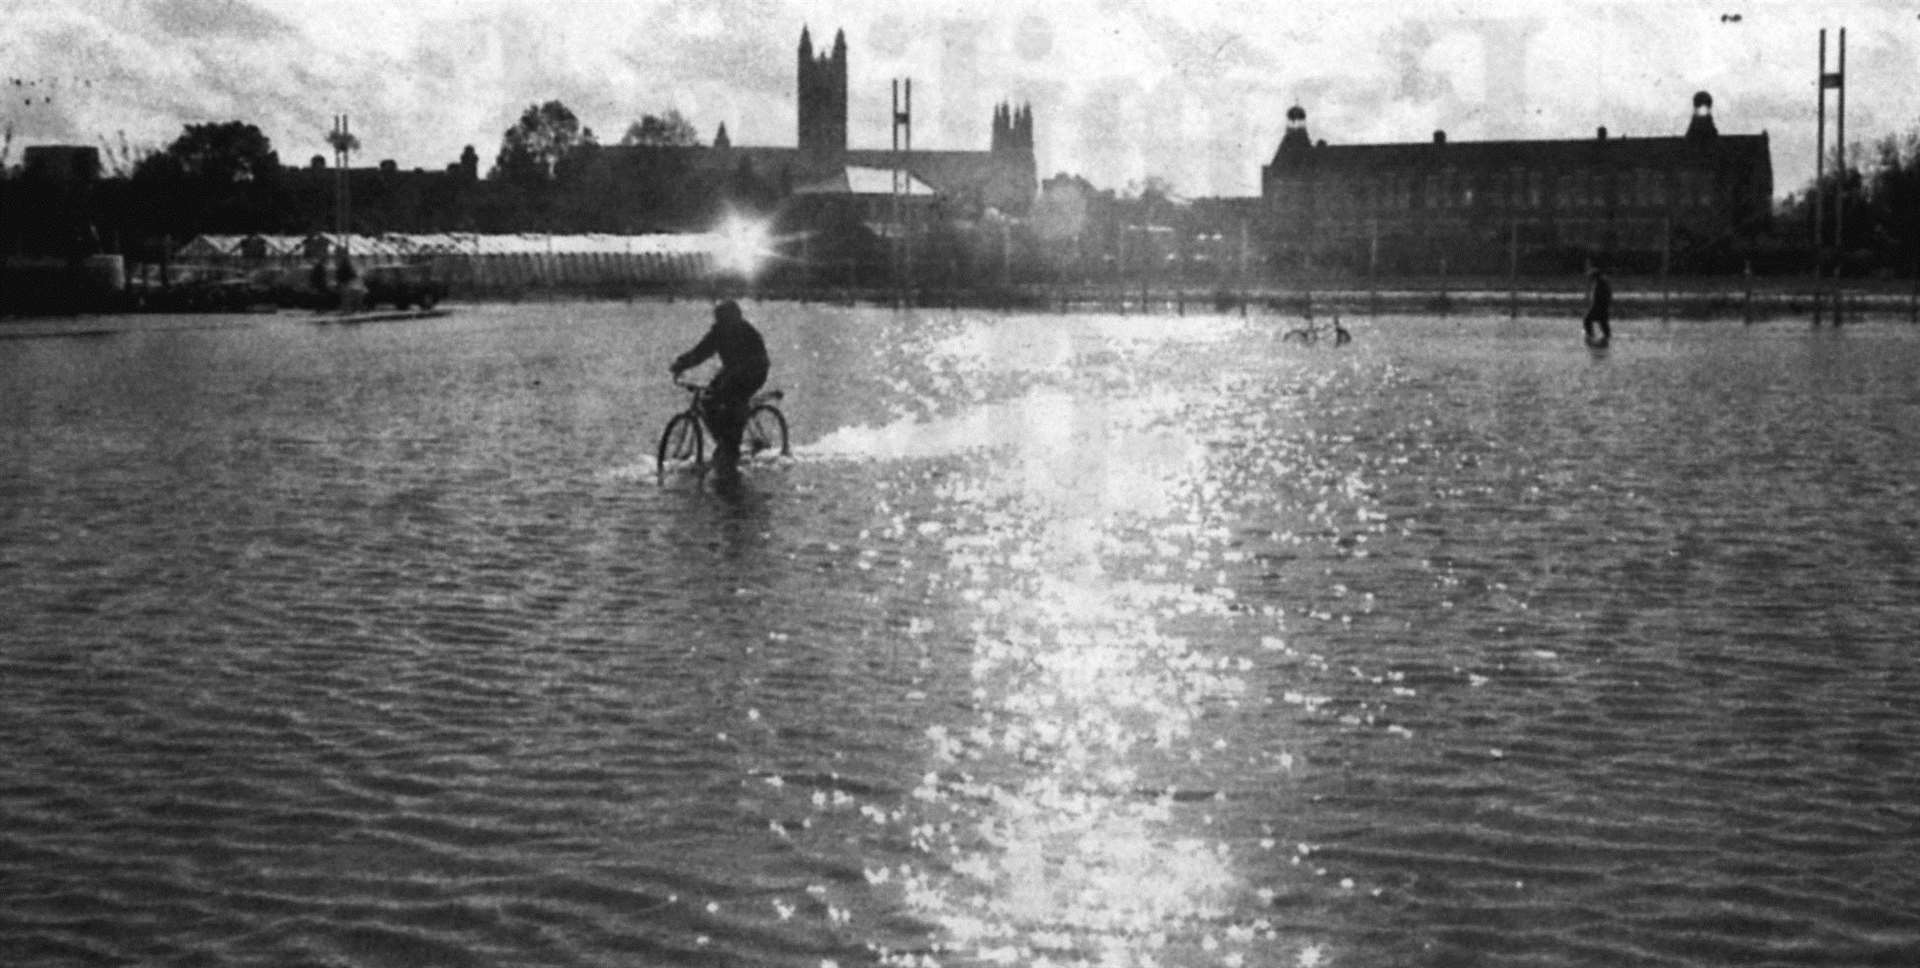 Canterbury Cathedral provides the backdrop as a cyclist rides through flood water